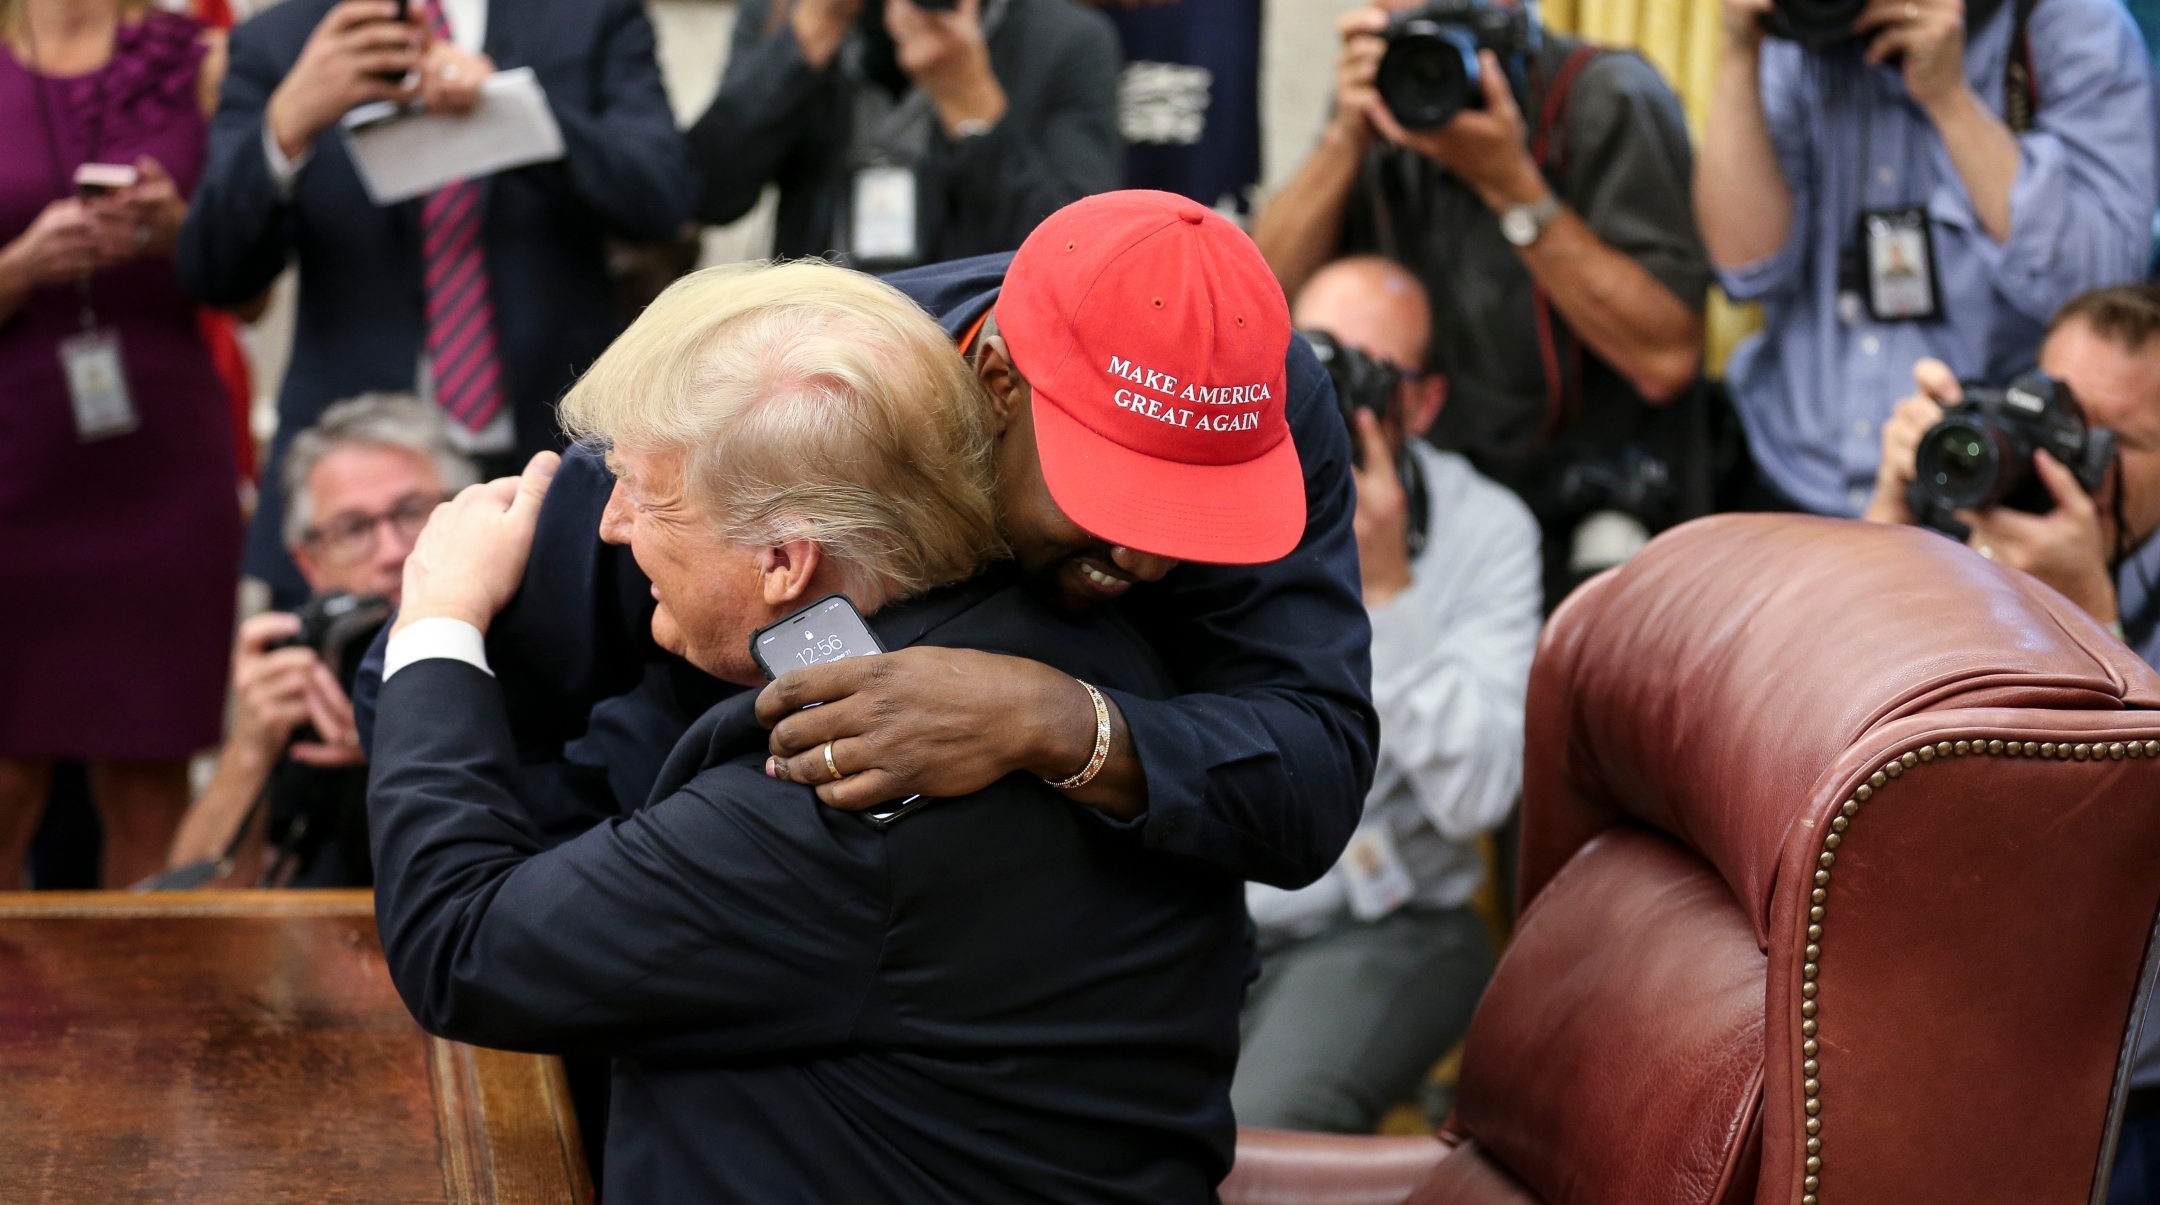 Rapper Kanye West hugs U.S. President Donald Trump during a meeting in the Oval office of the White House, Oct. 11, 2018. (Oliver Contreras – Pool/Getty Images)